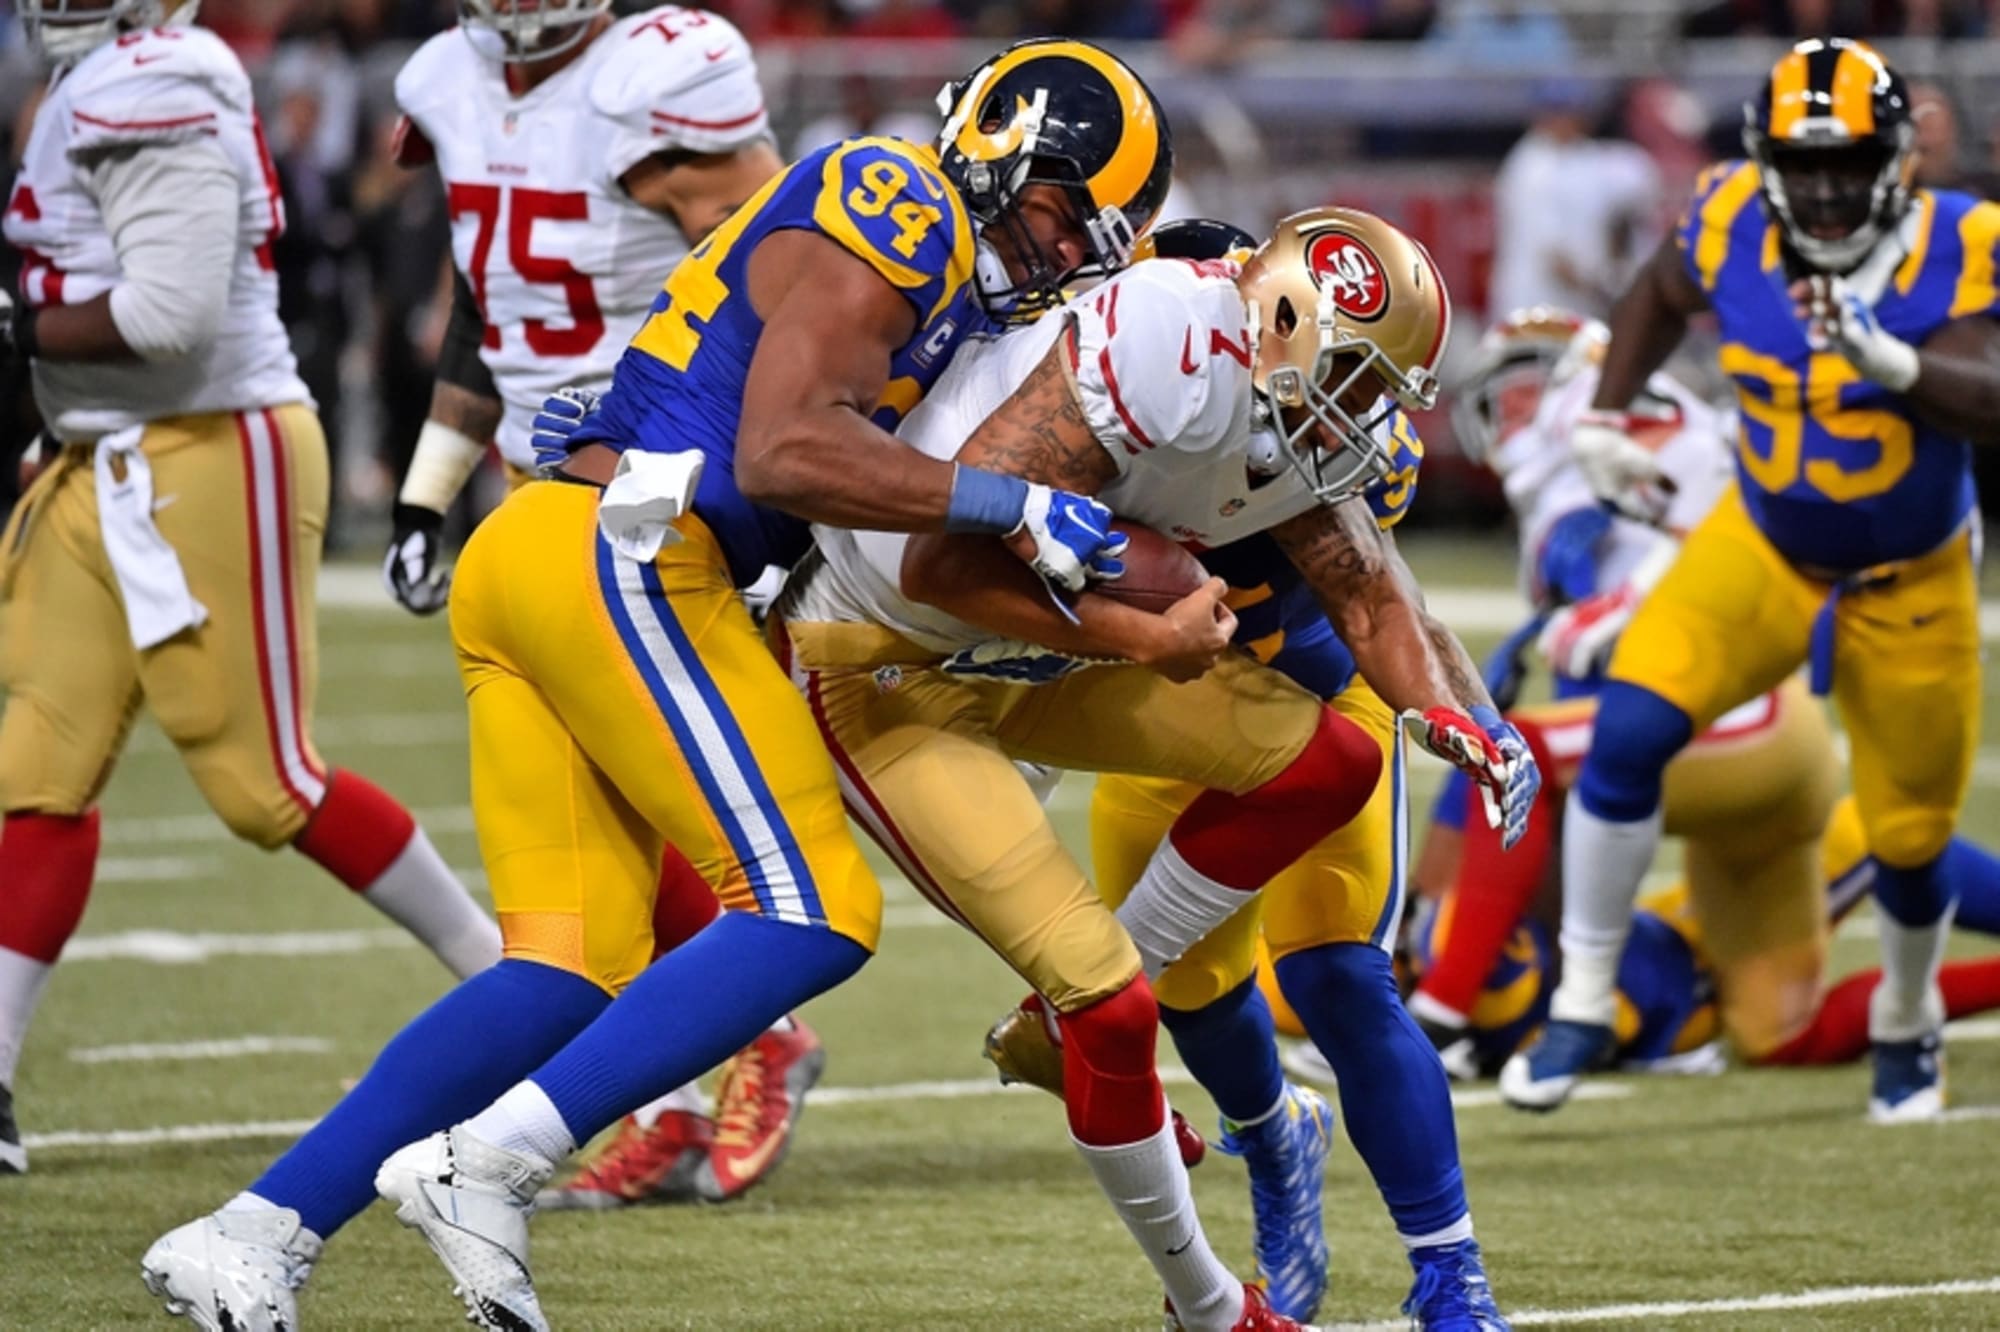 Rams vs. 49ers Start Time, Broadcast Info, and More